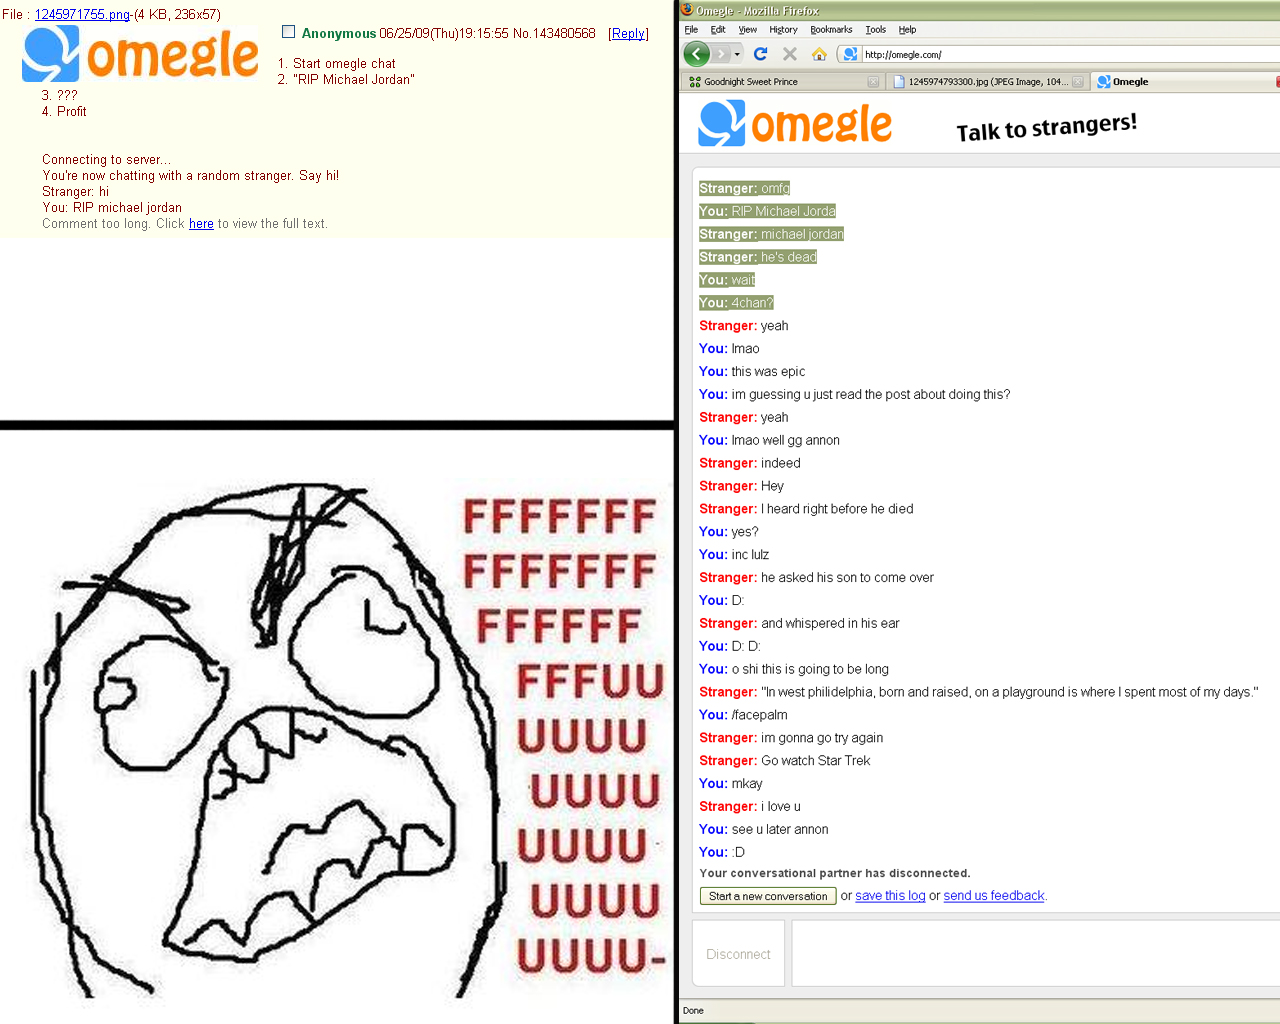 Randomly forum strangers chat with omegle 15 Websites